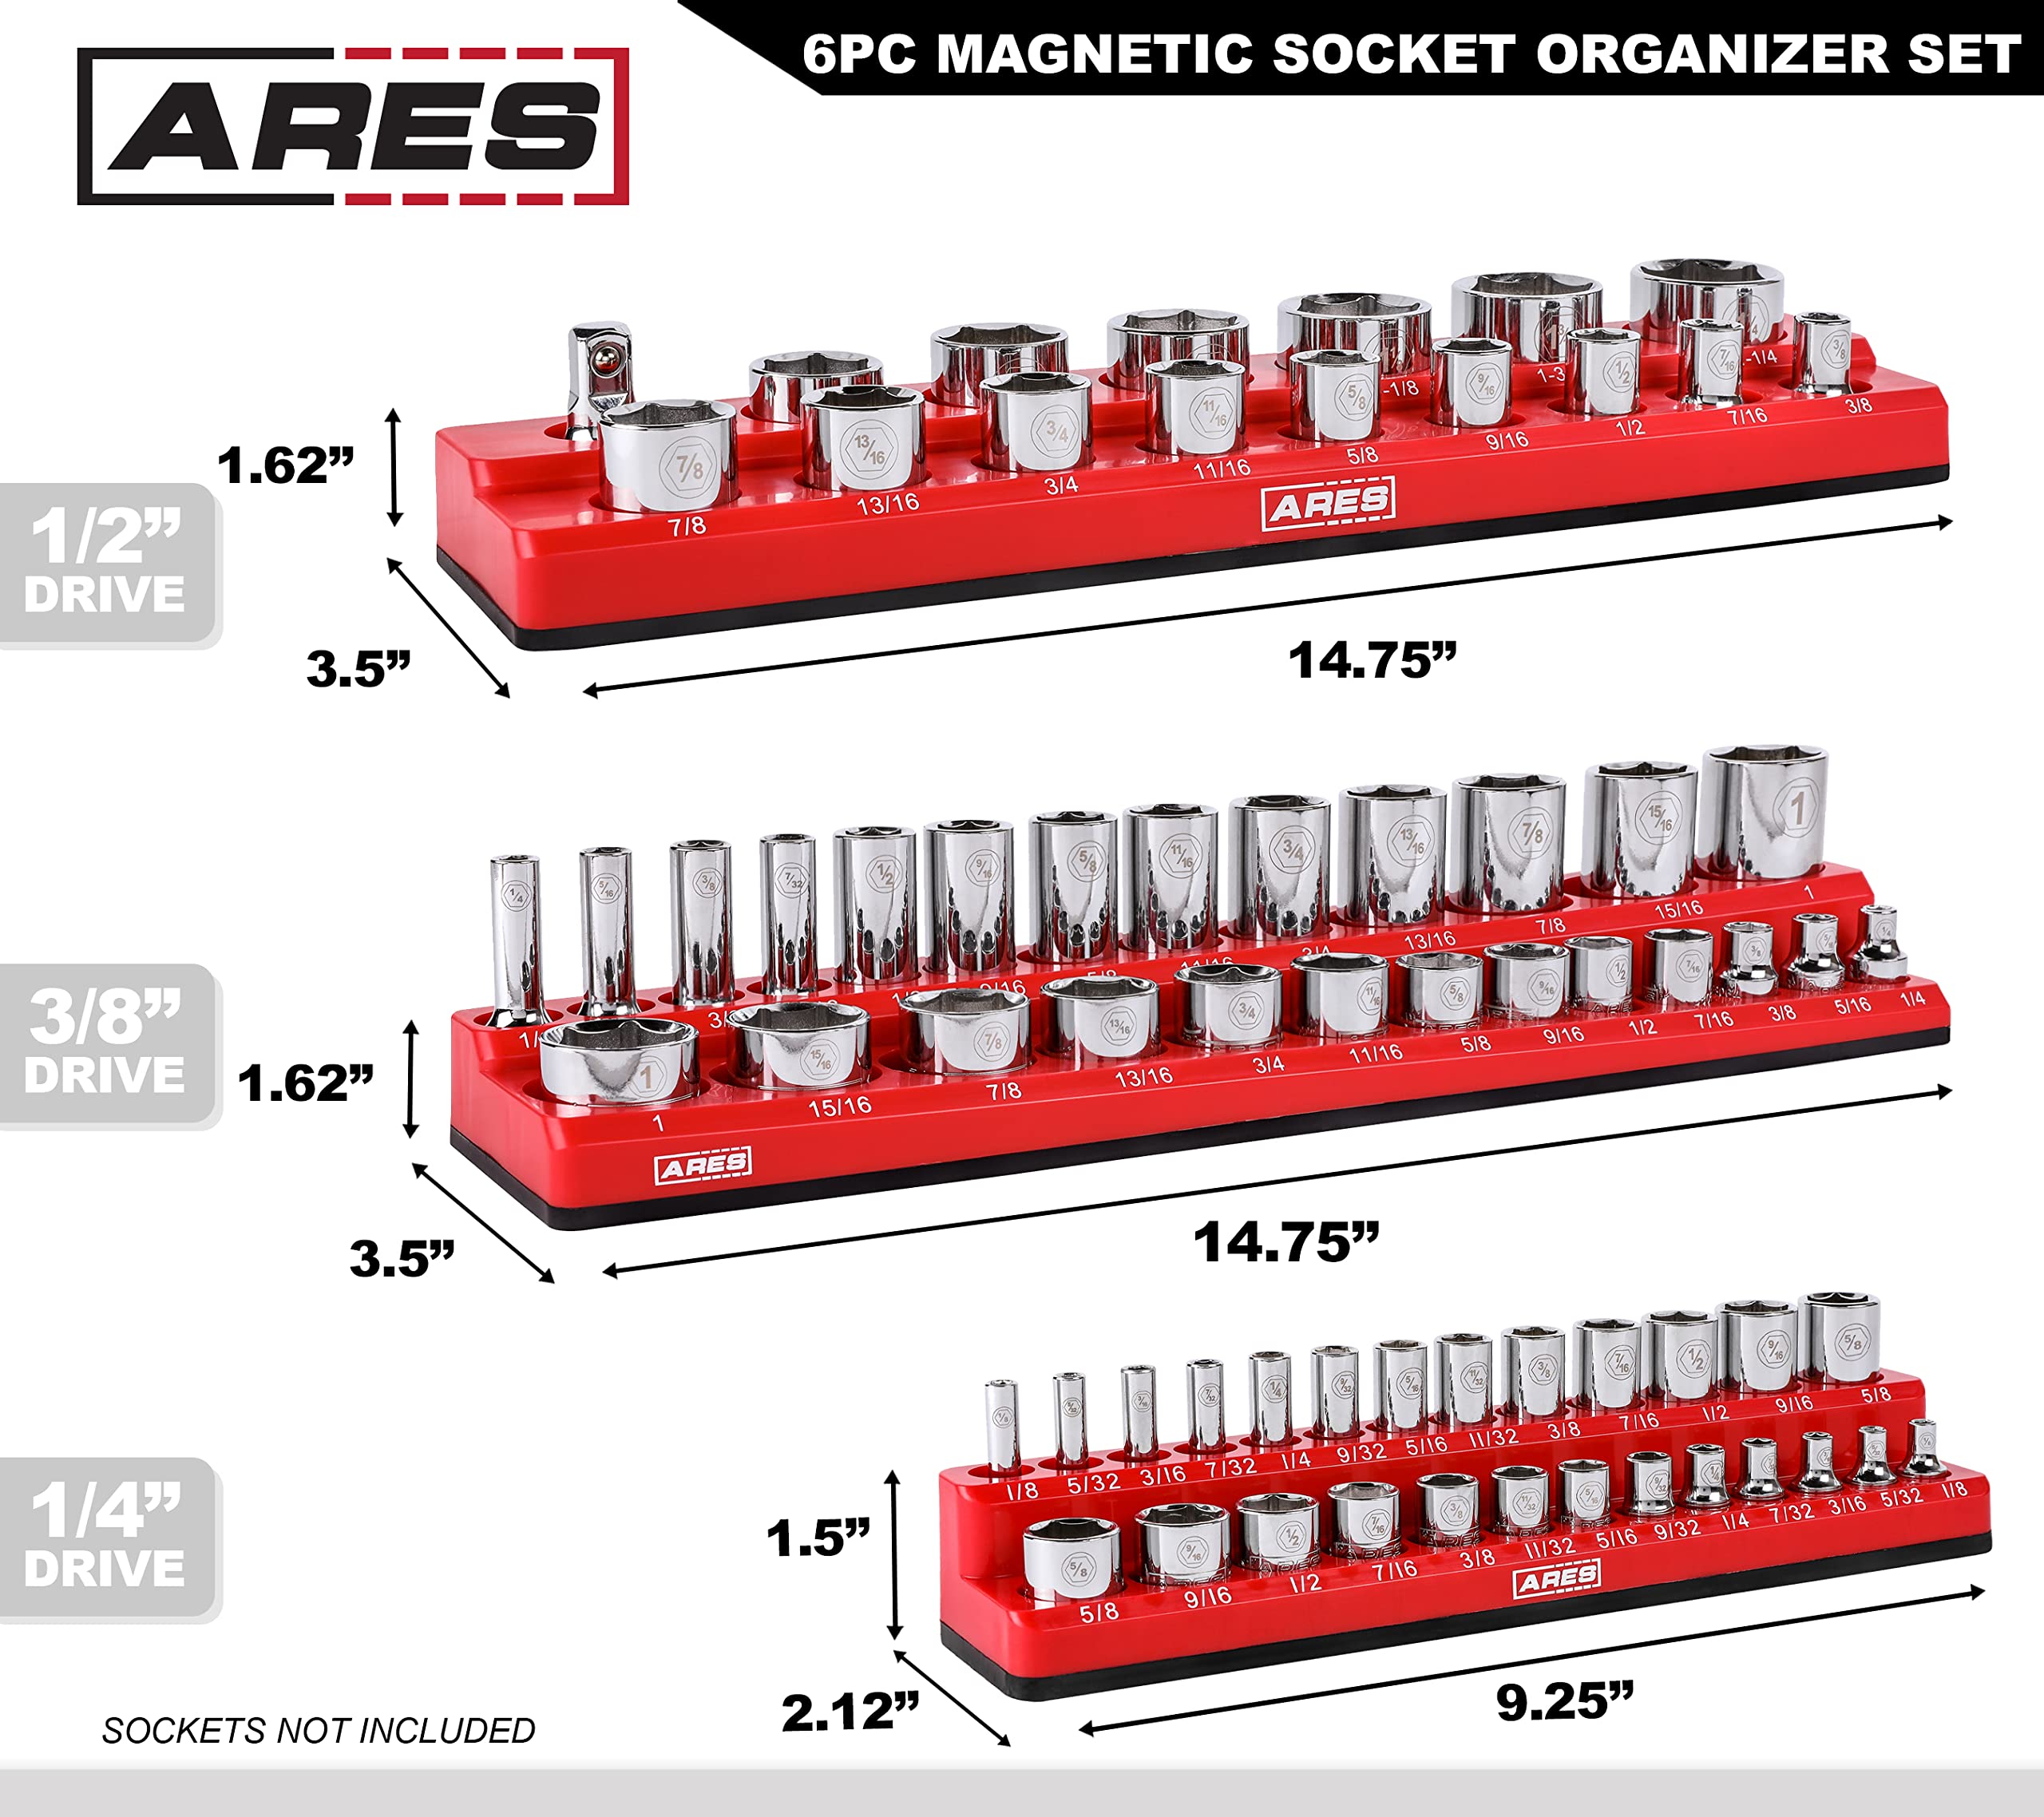 ARES 60058-6-Pack Set Metric and SAE Magnetic Socket Organizers -Blue and Red -1/4 in, 3/8 in, 1/2 in Socket Holders -143 Pieces of Standard (Shallow) and Deep Sockets -Organize Your Tool Box